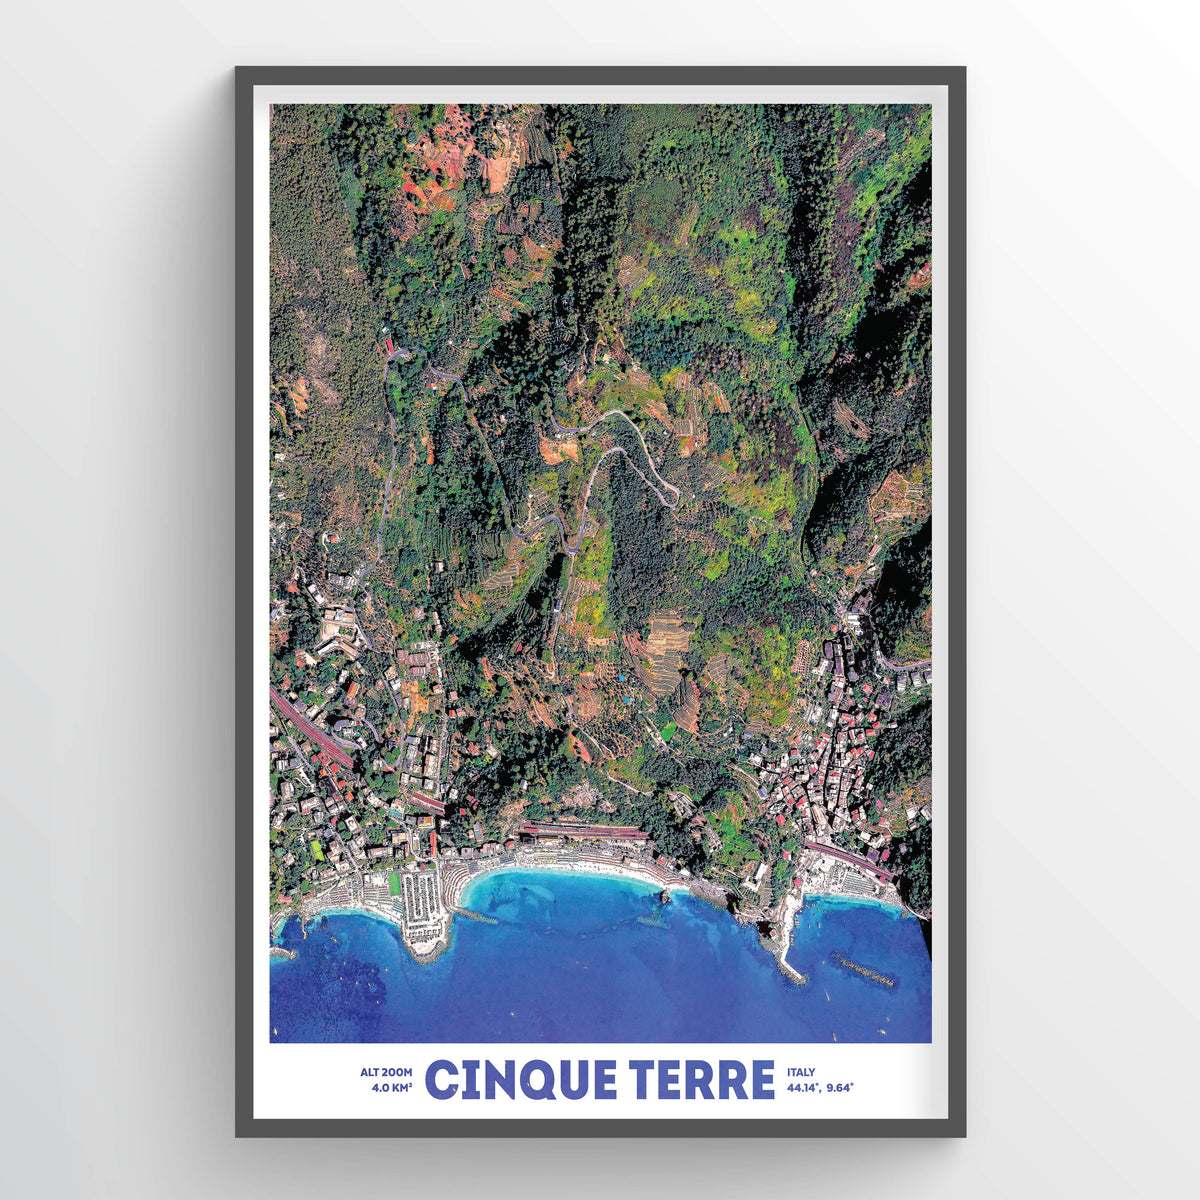 Cinque Terre Earth Photography - Art Print - Point Two Design